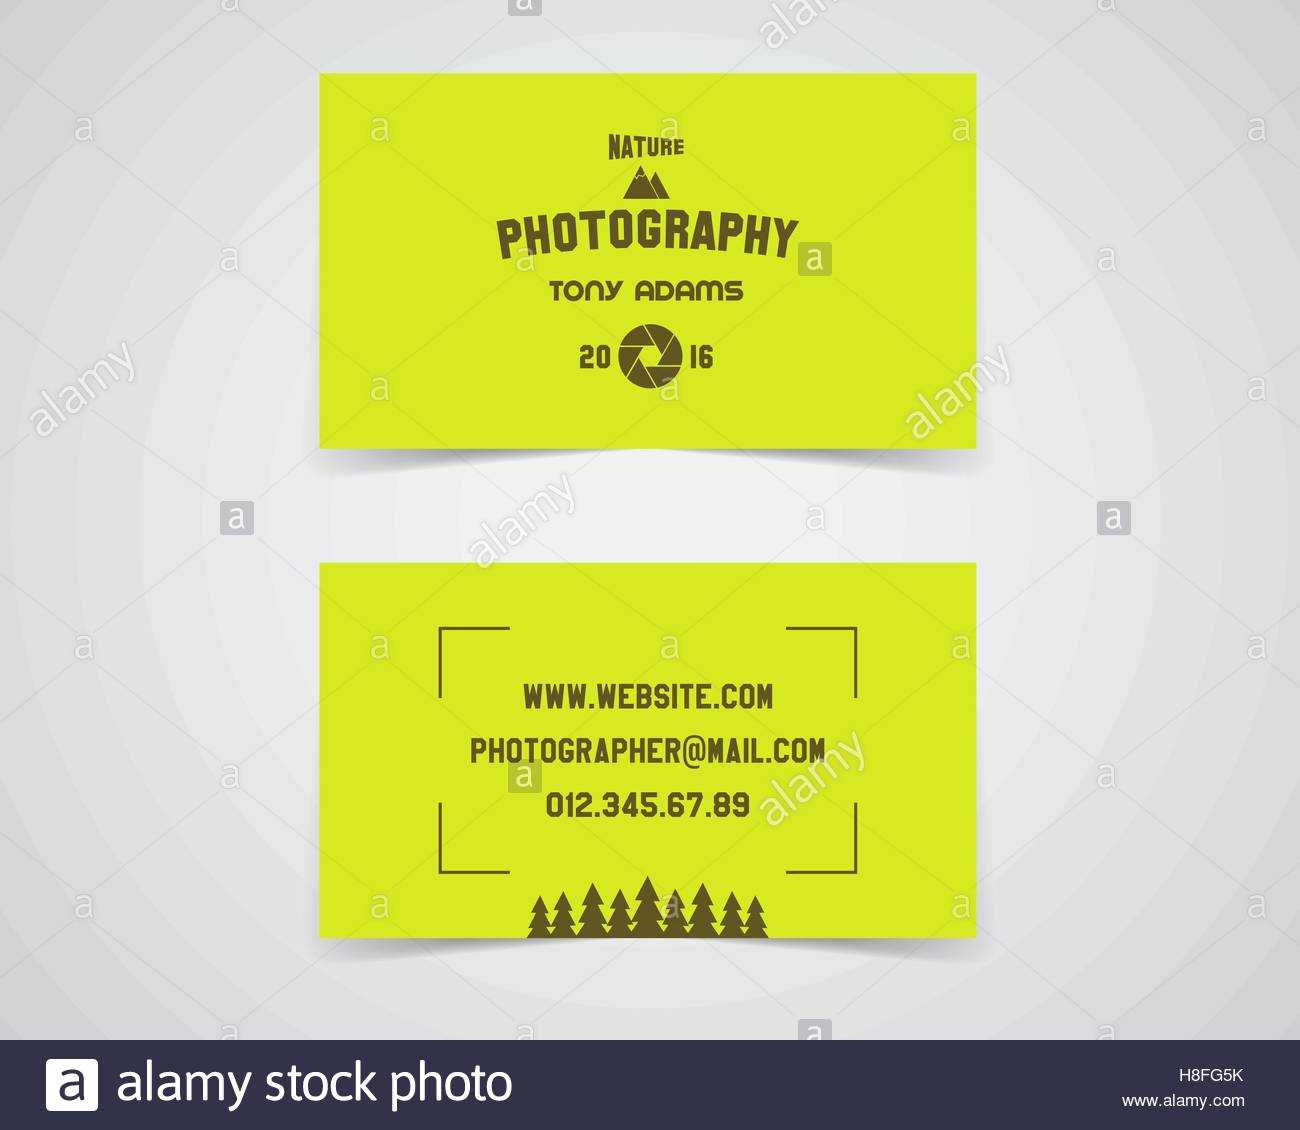 Modern Light Business Card Template For Nature Photography Within Photographer Id Card Template